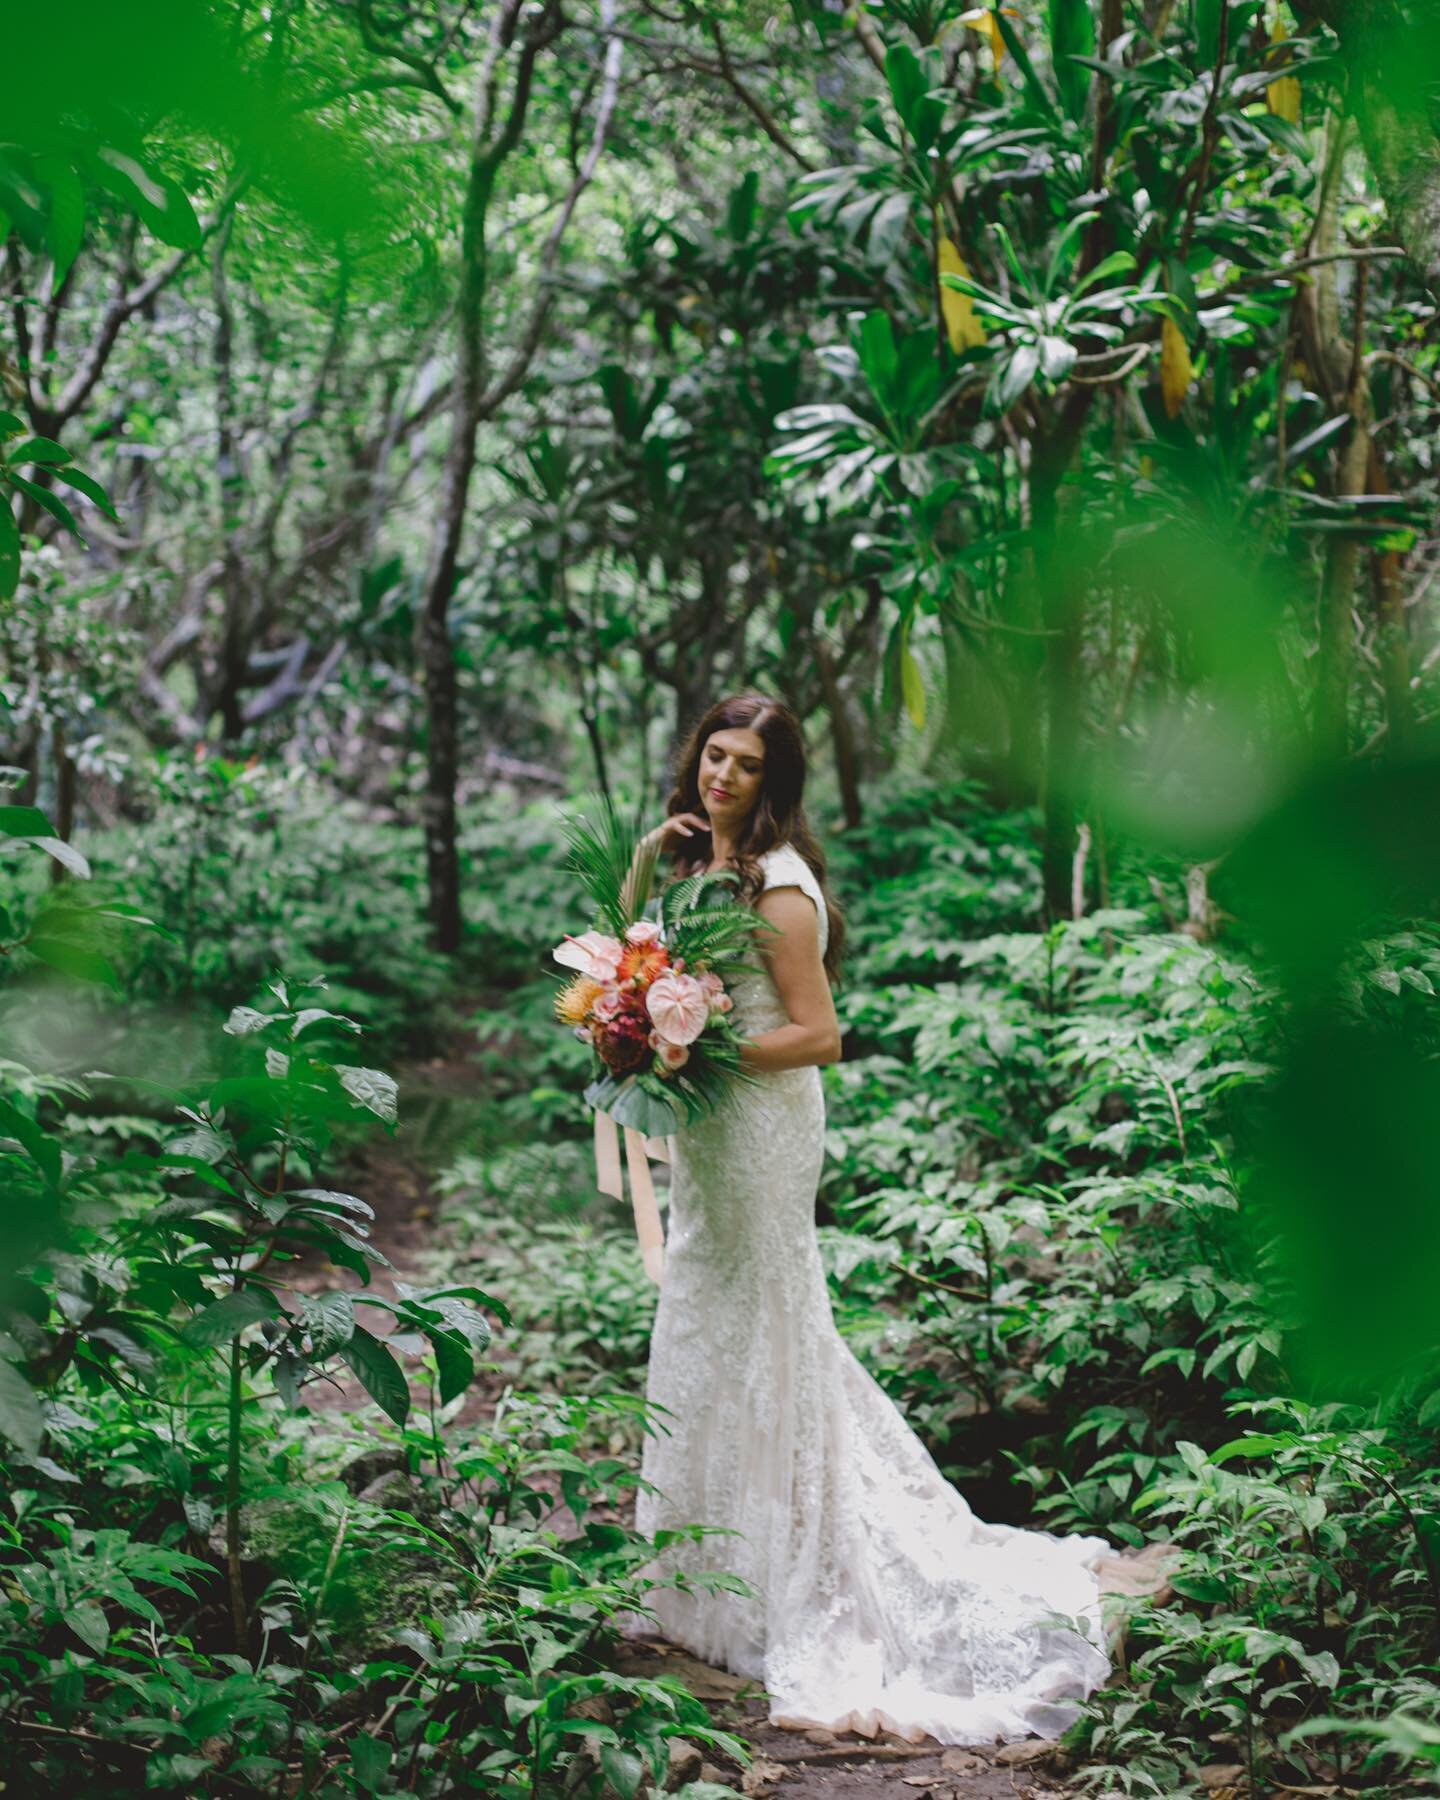 This gorgeous lovely lady basking in all the natural beauty around her. It&rsquo;s an awe inspiring moment to see it all come together for a bride.